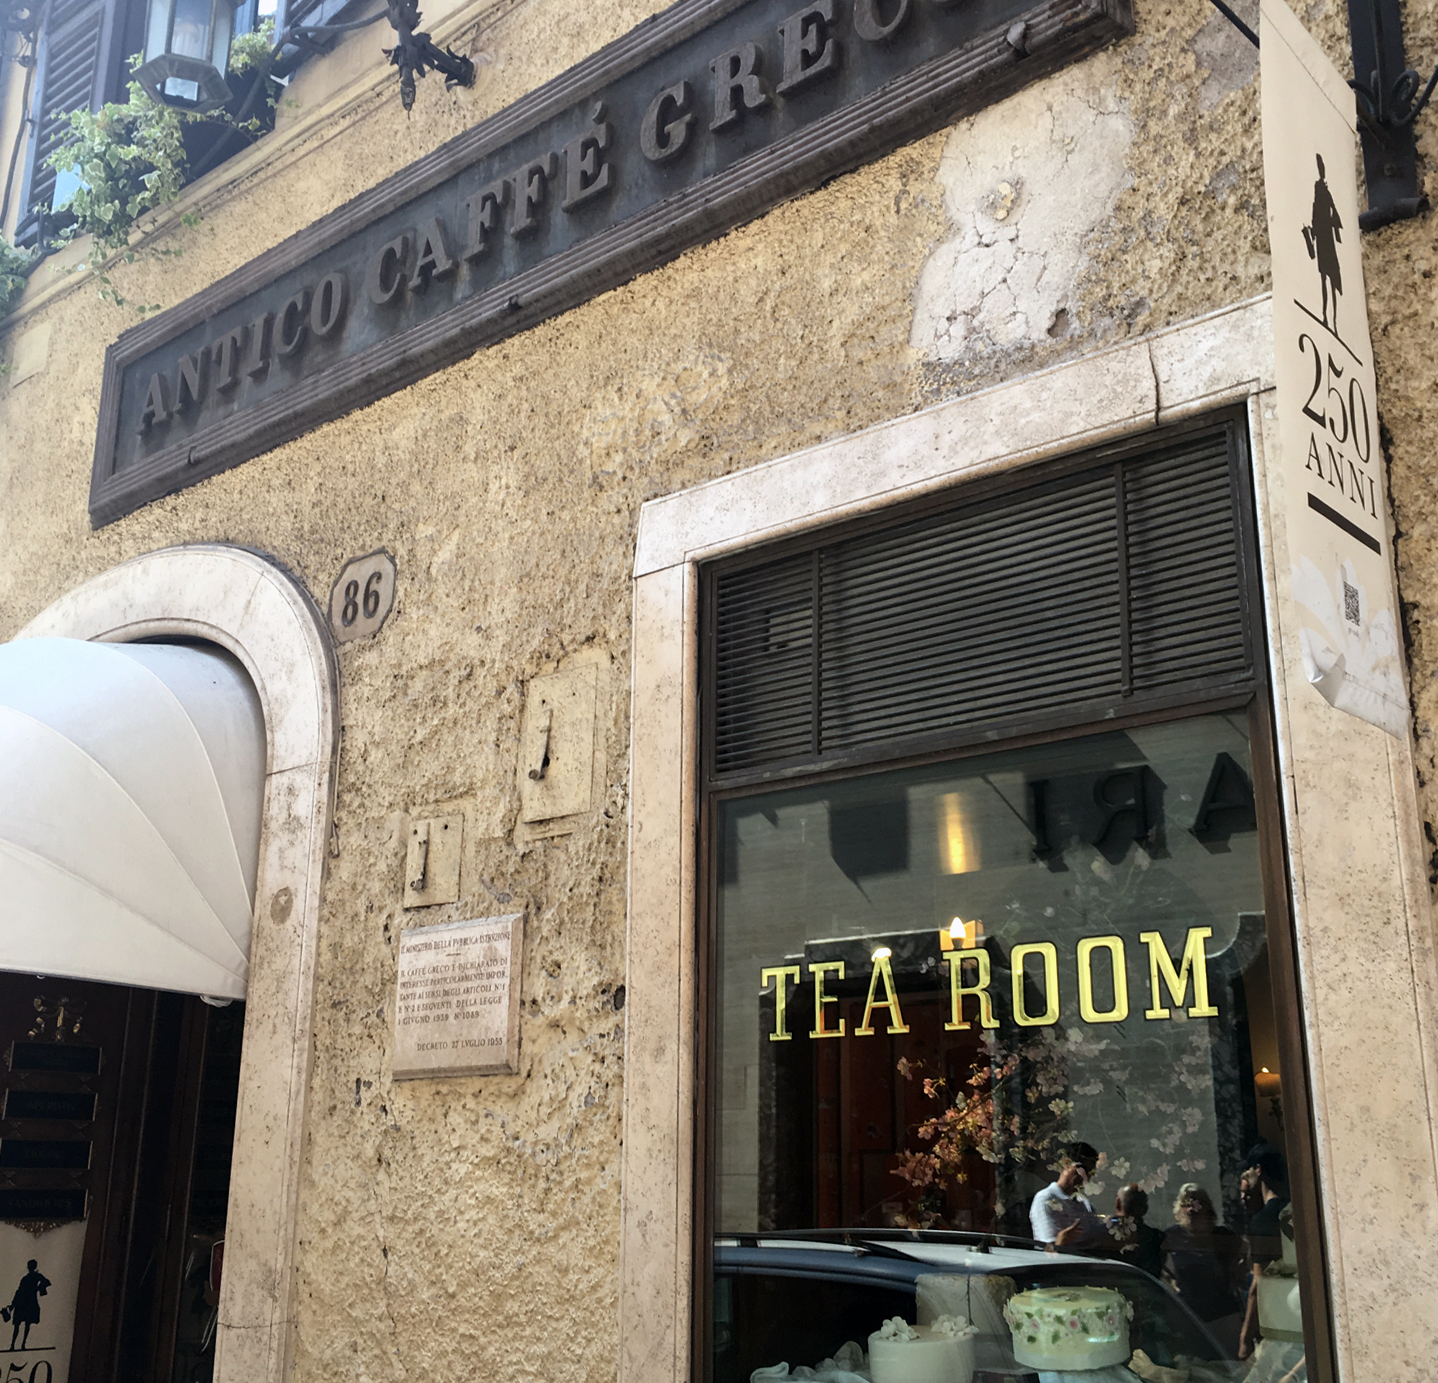 The entrance to Caffé Greco, the oldest café in Rome.